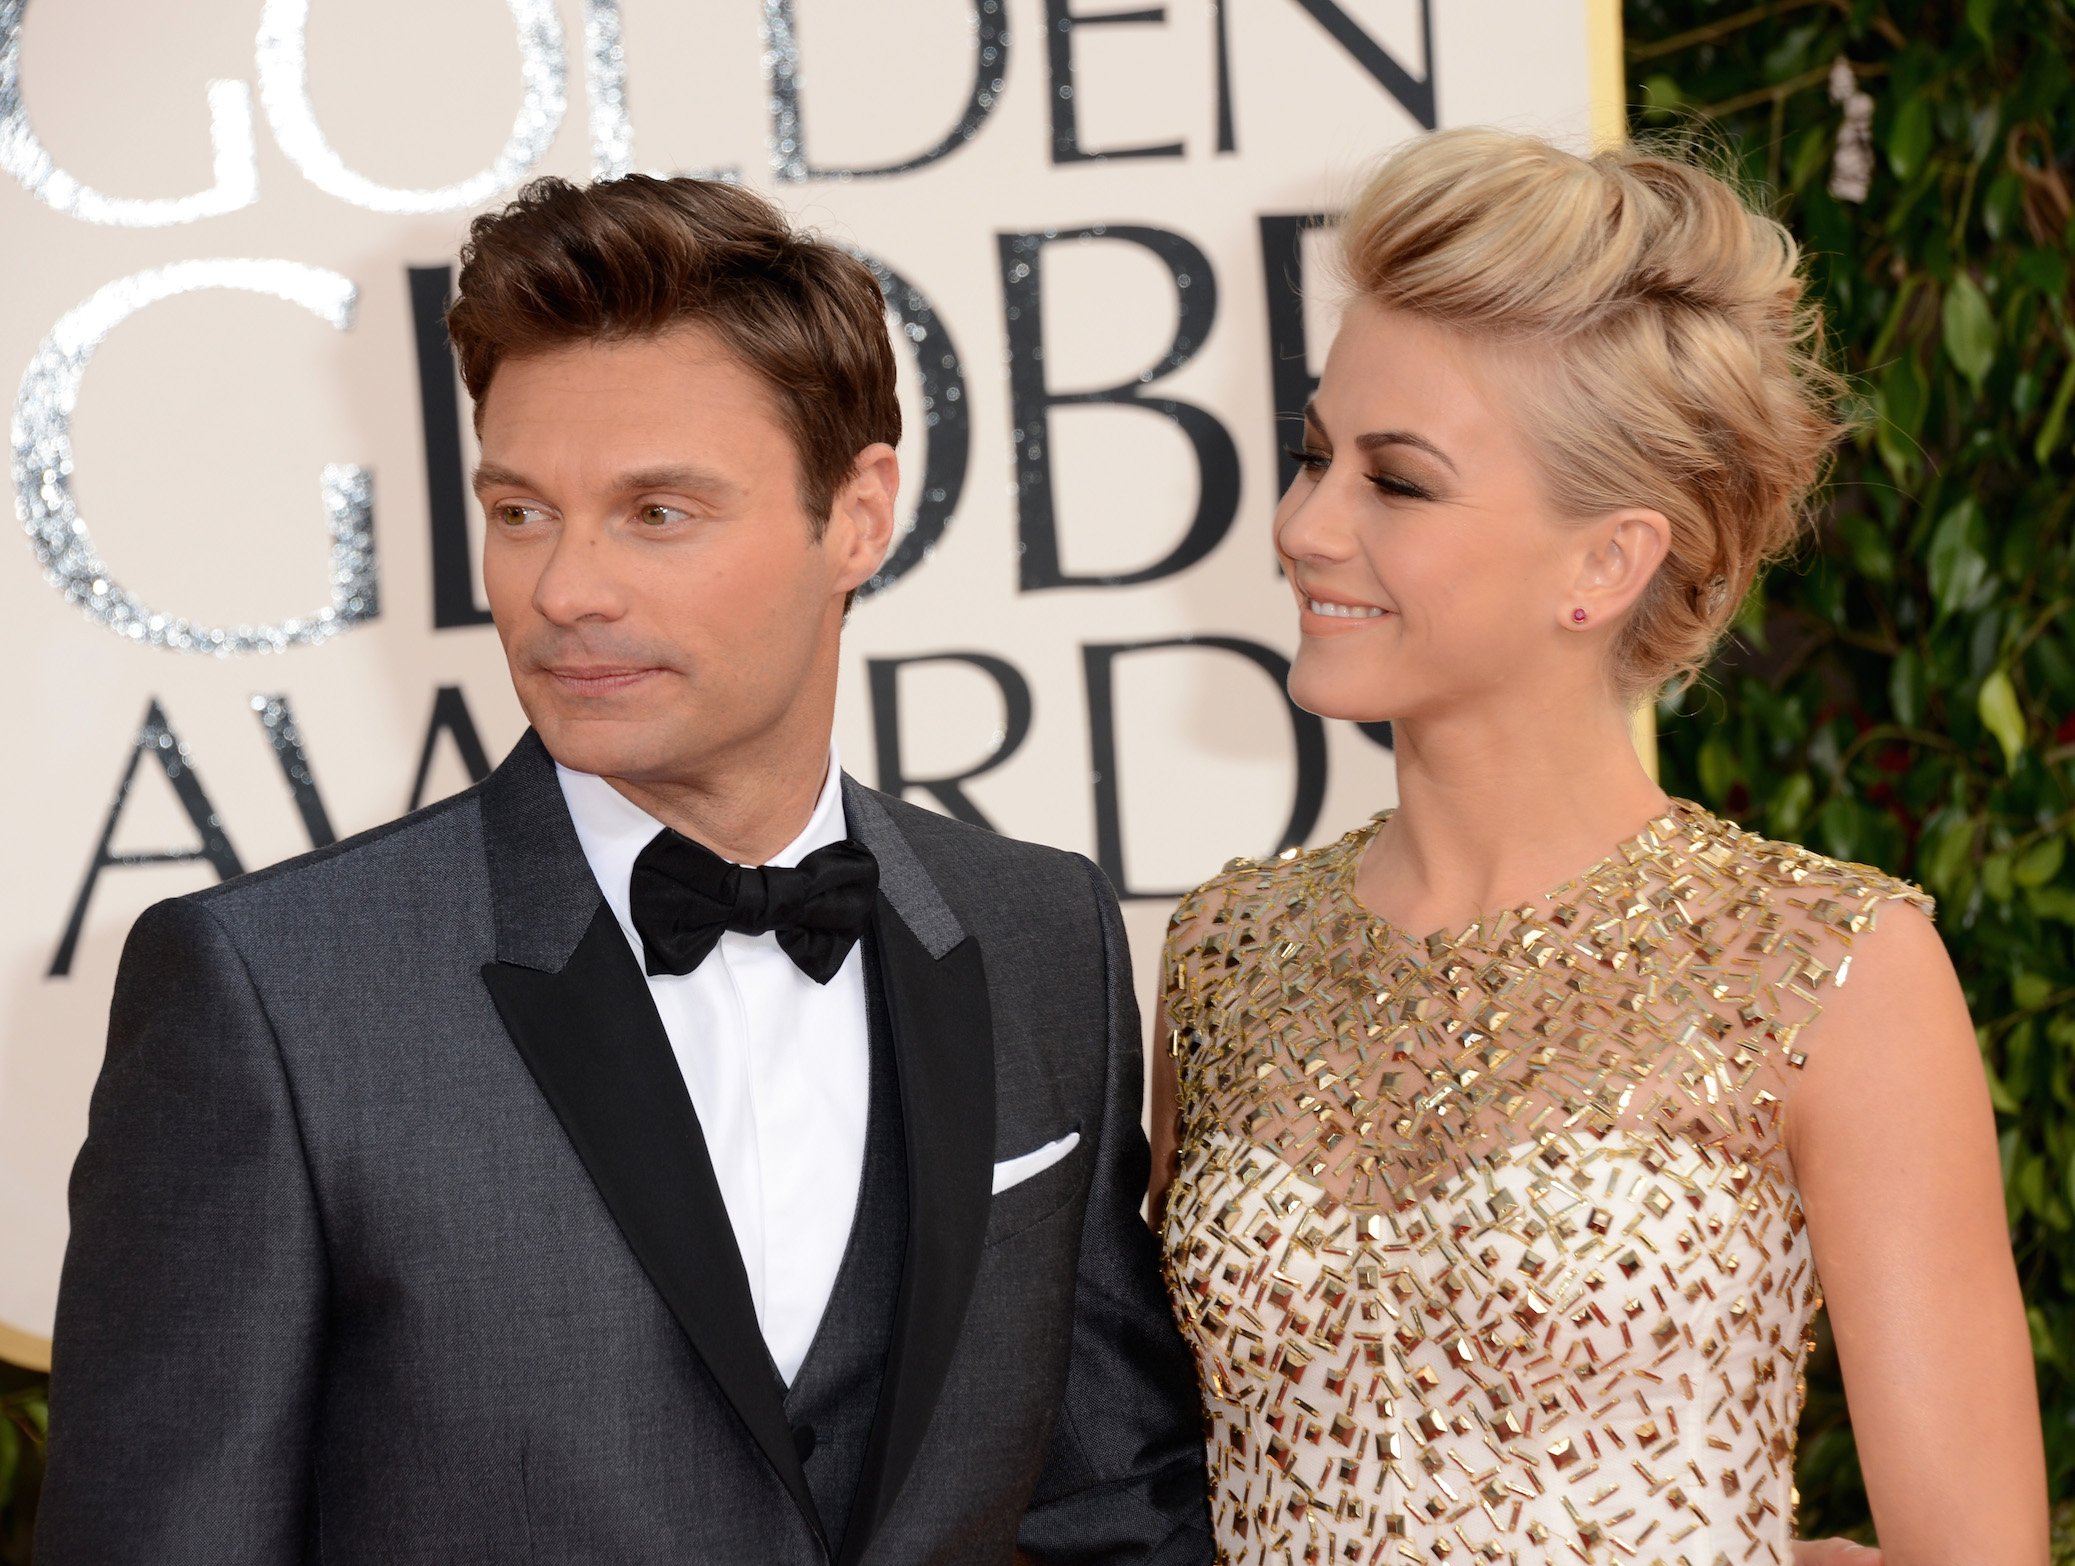 Why Did Julianne Hough and Ryan Seacrest Break Up?